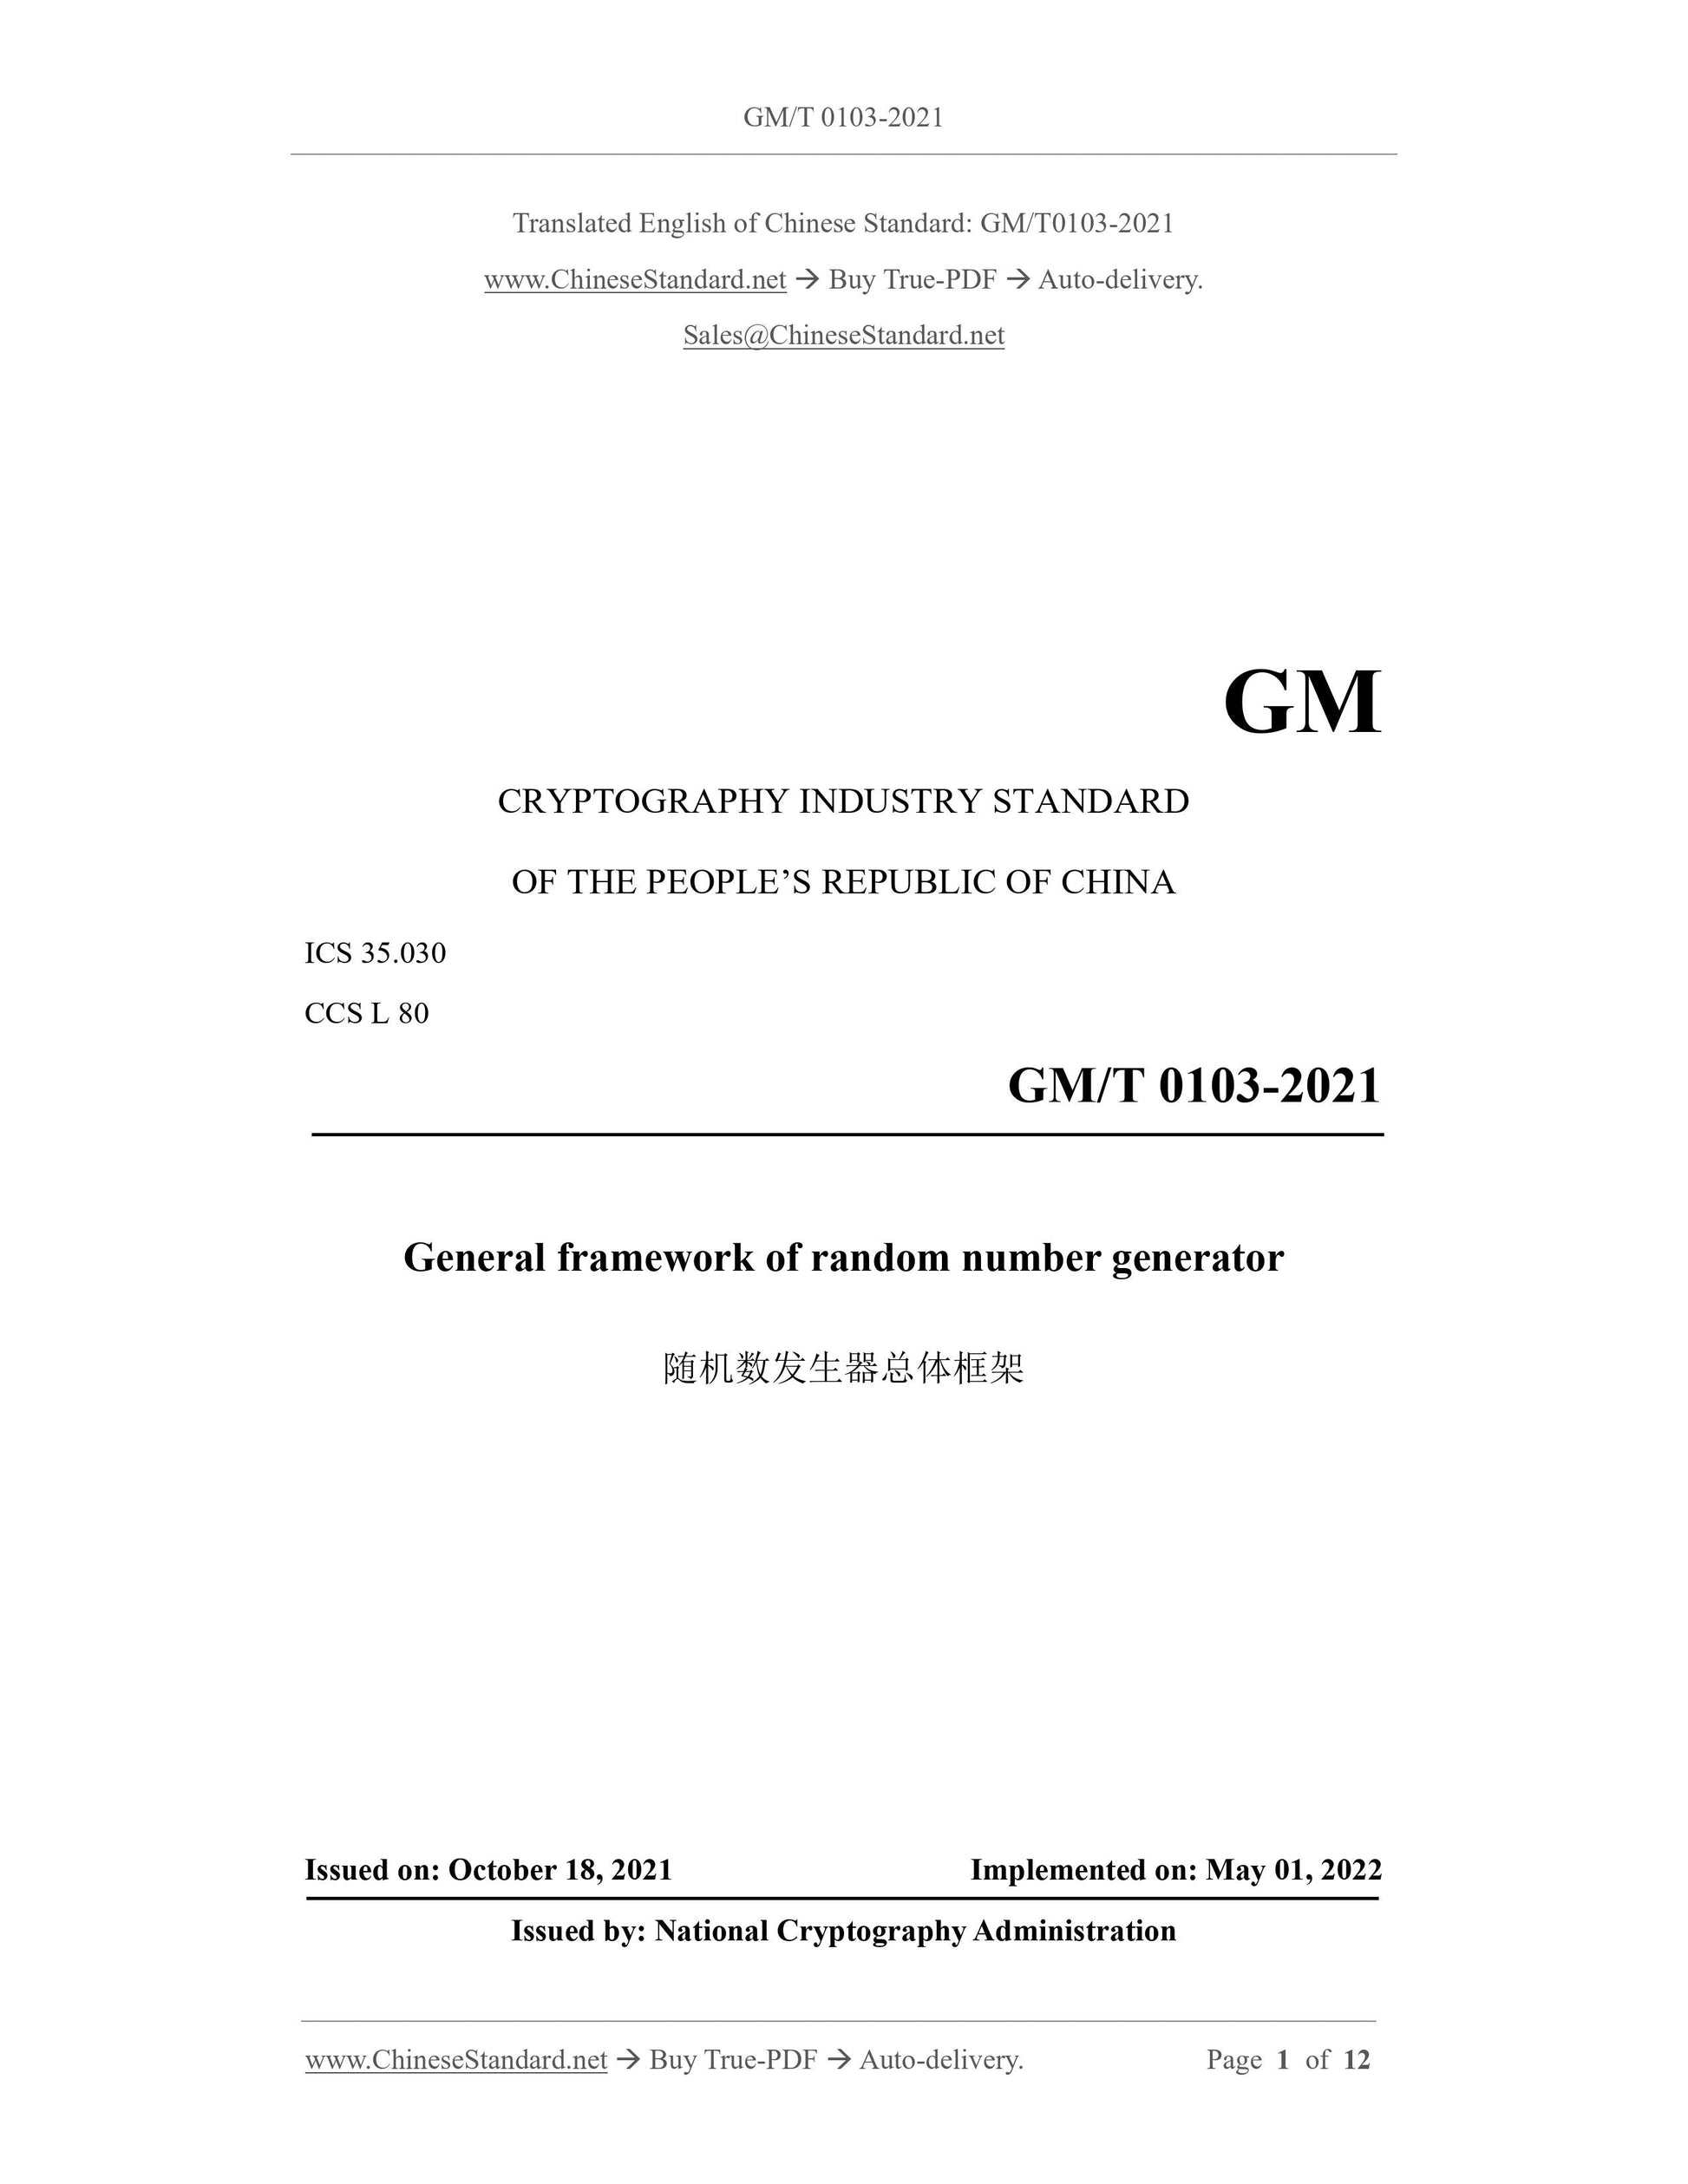 GM/T 0103-2021 Page 1